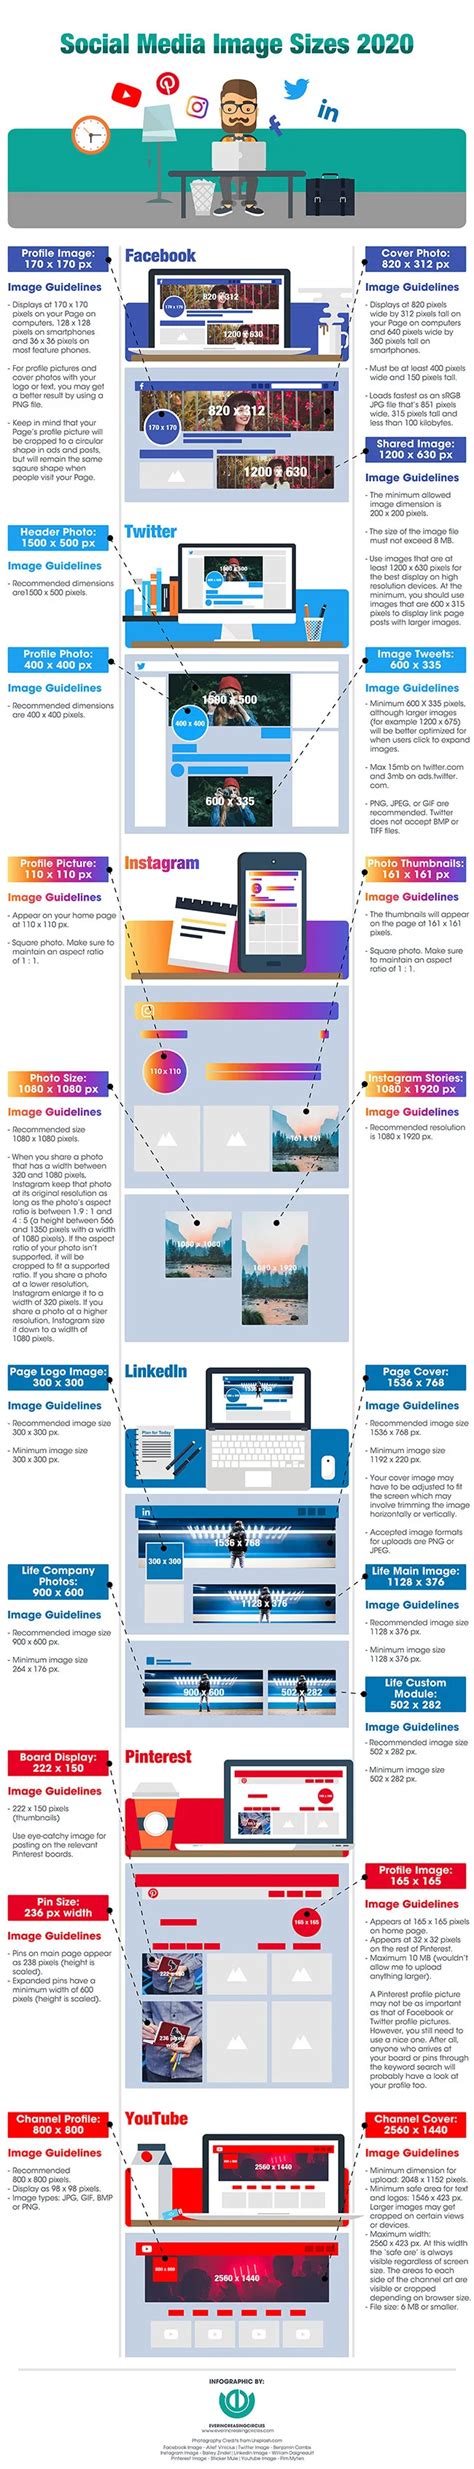 Your Bookmarkable Guide To Social Media Image Sizes In 2020